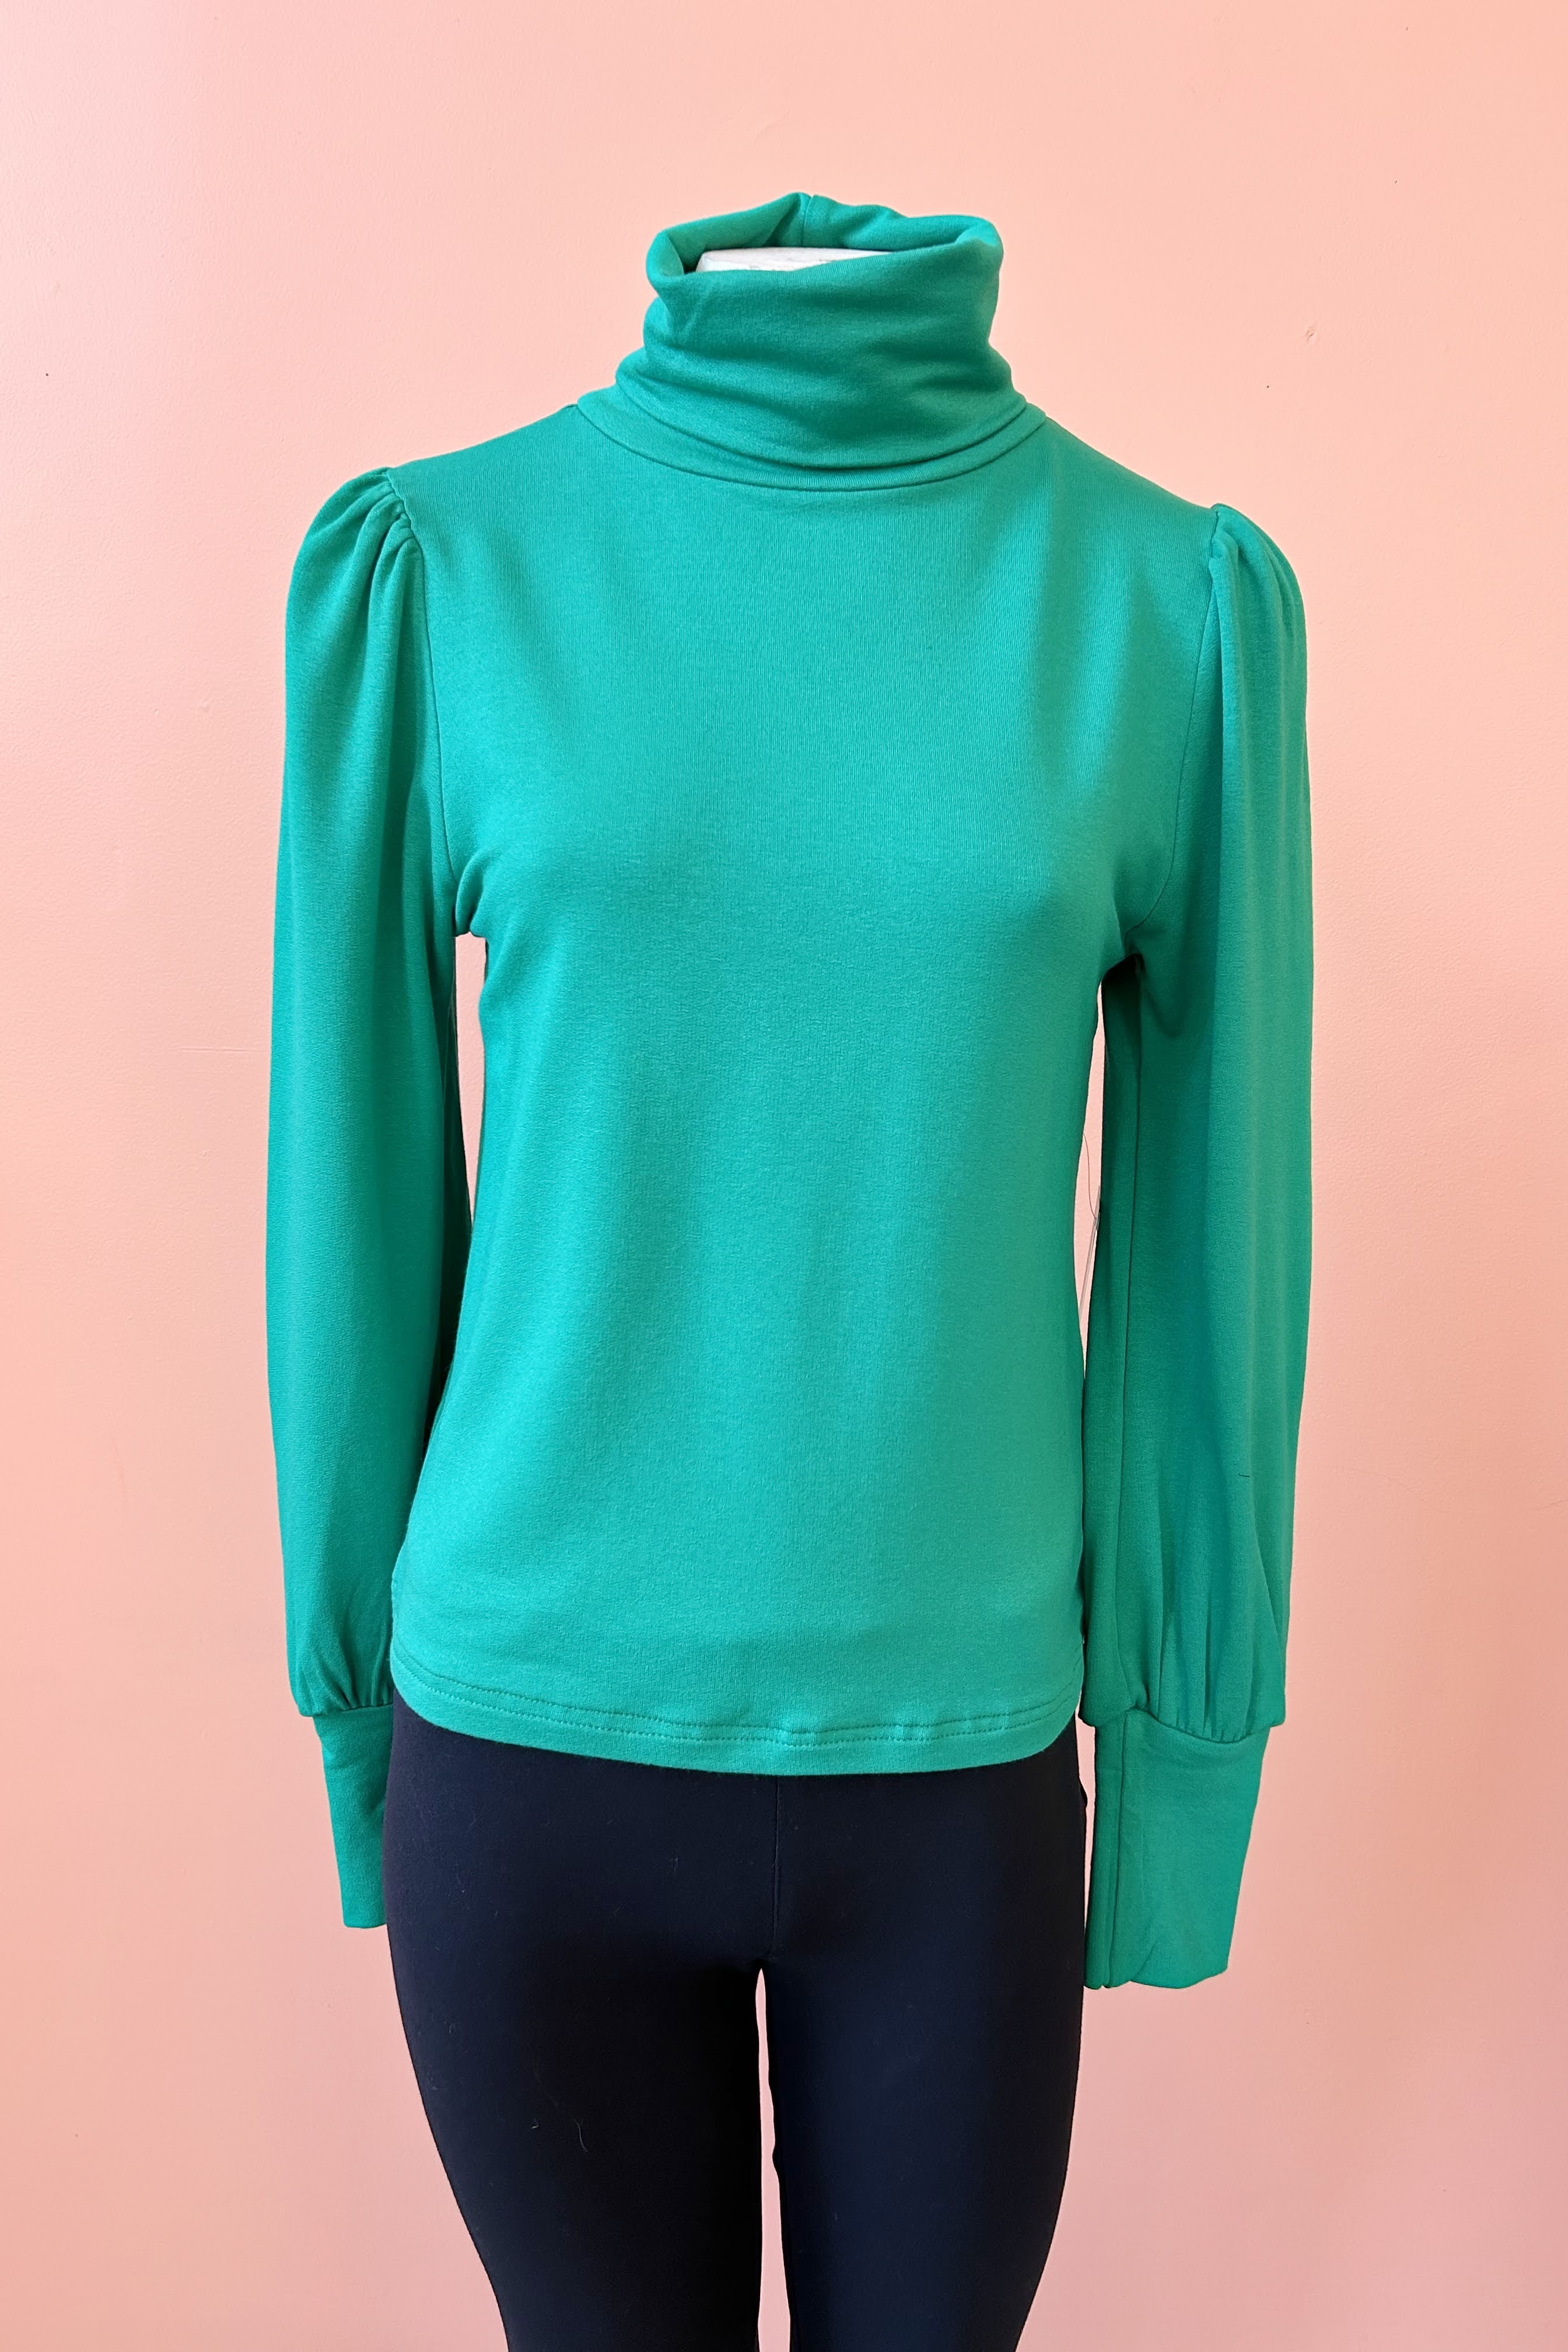 Turtleneck Top by Misstery, Sparkle, high neck, puffed sleeves with gathered cuffs, sizes S to XL, made in Toronto 